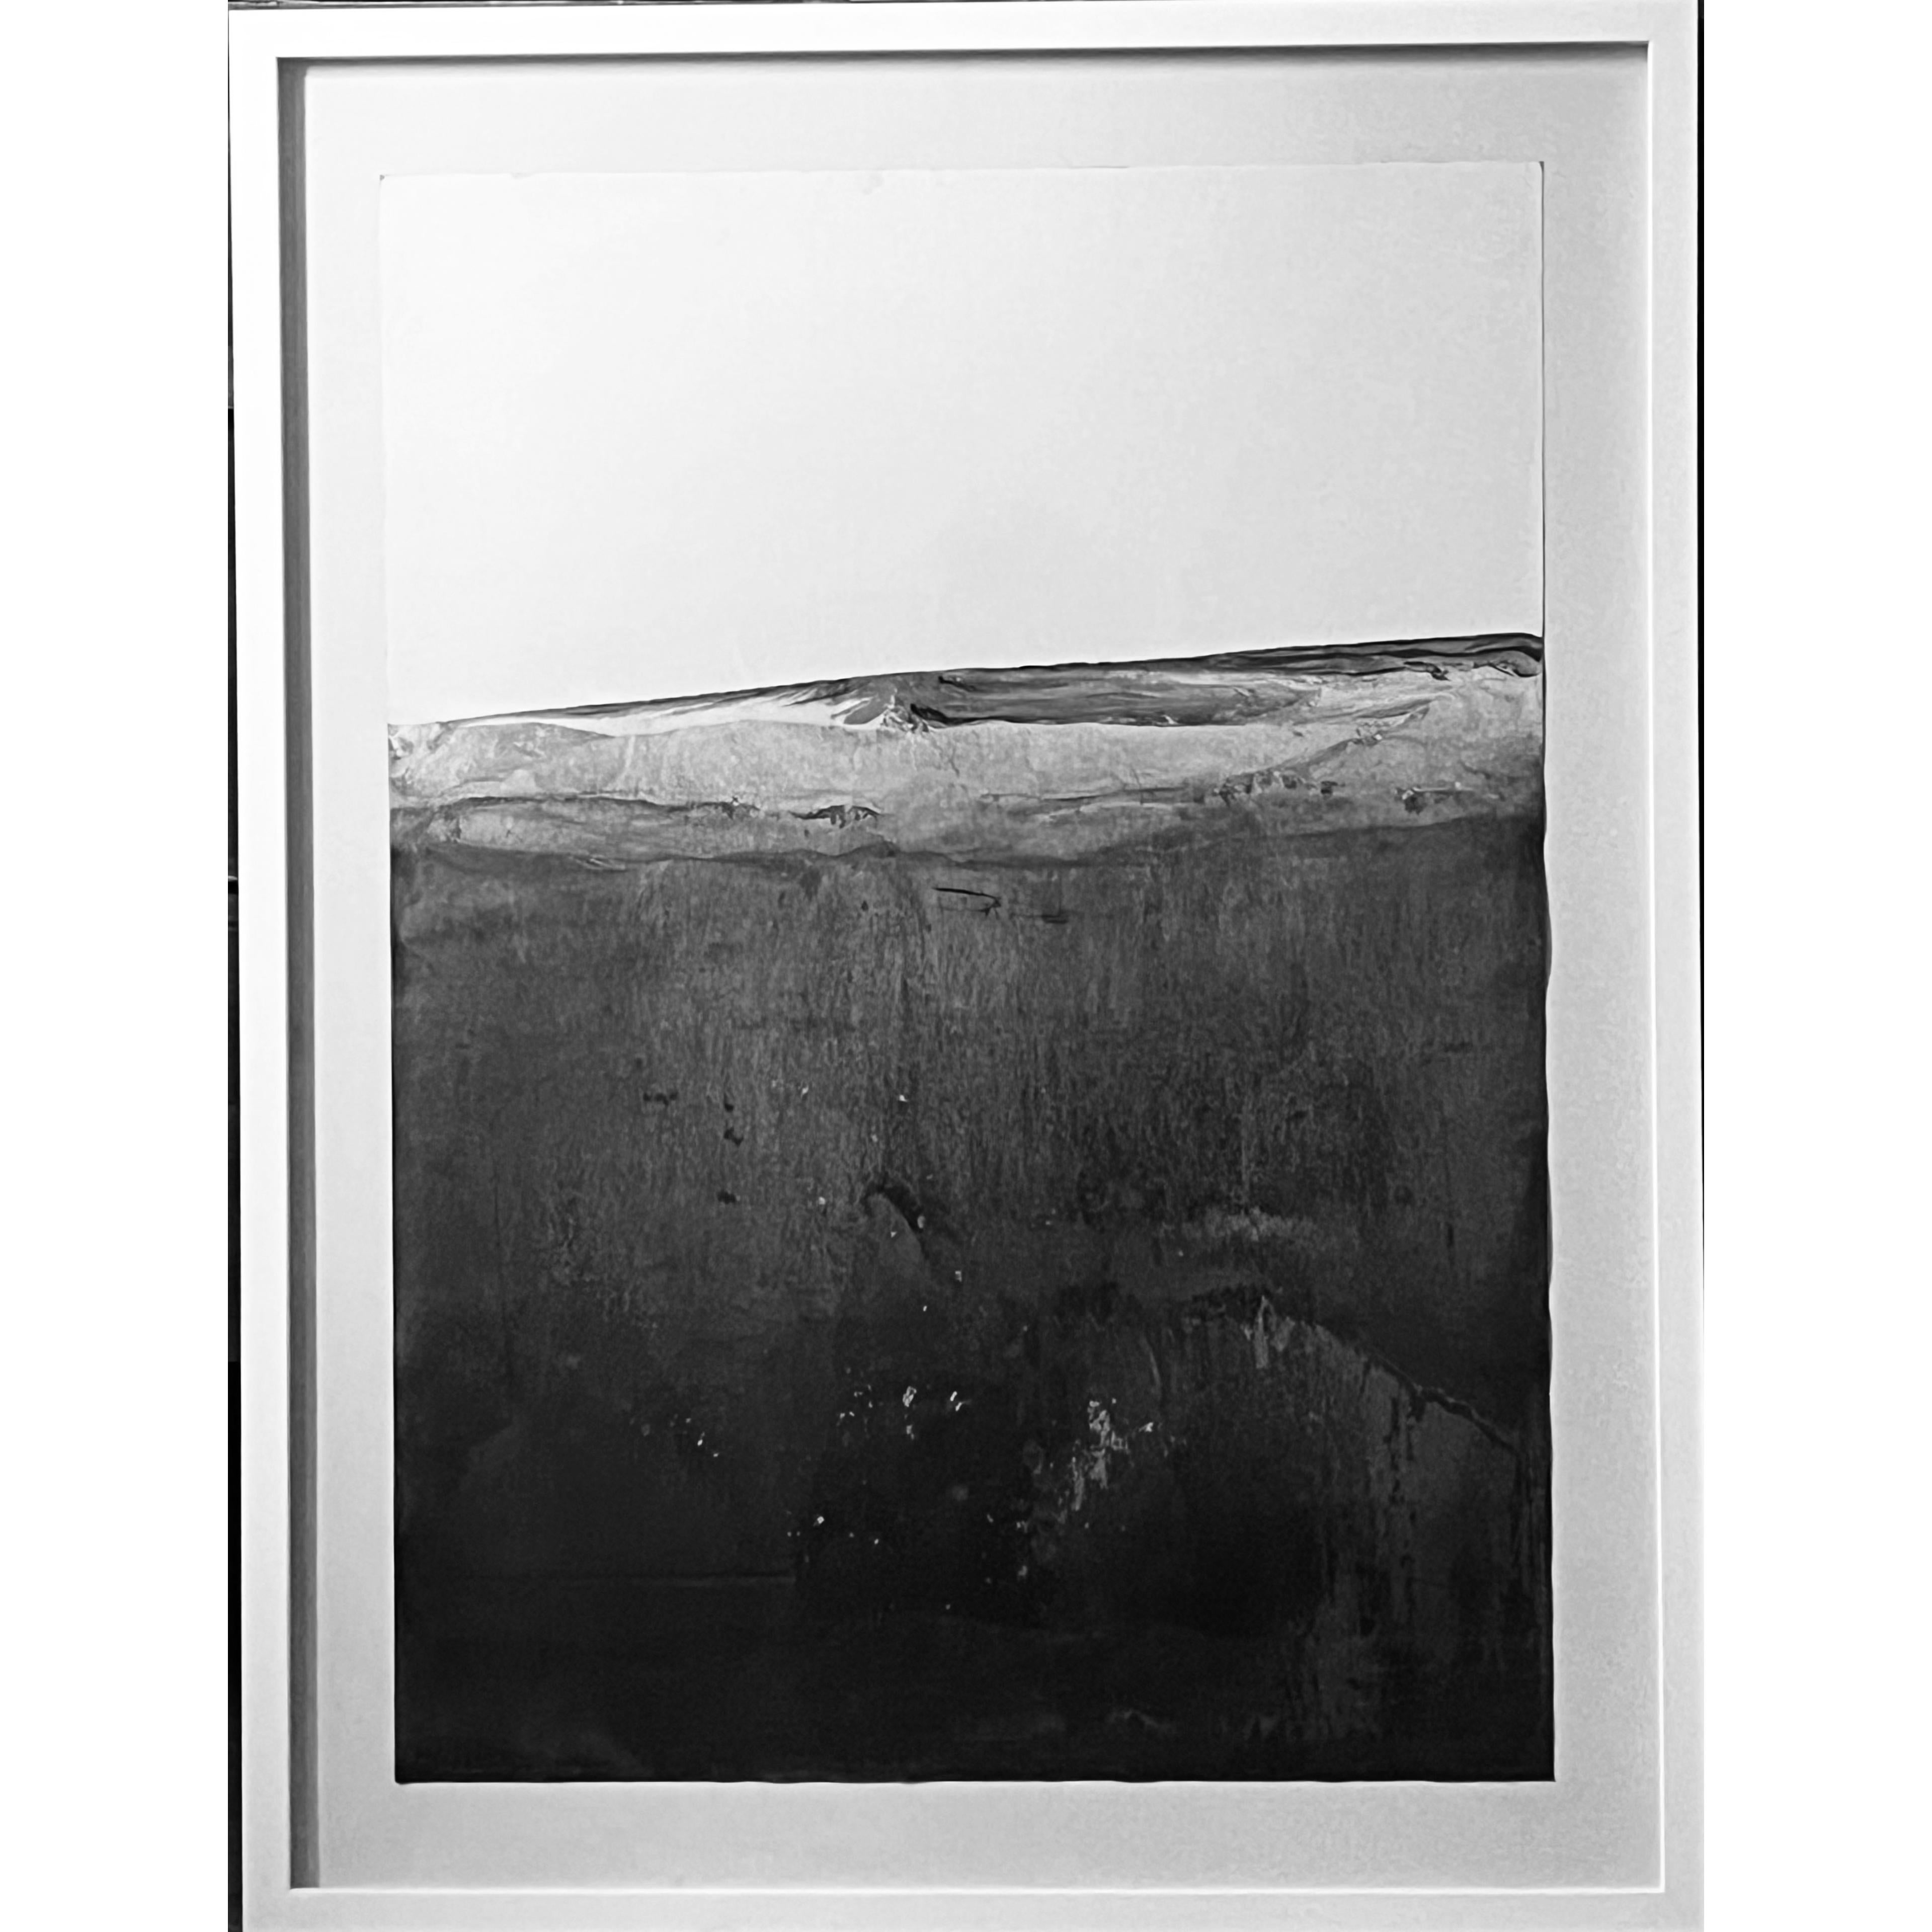 Landscape BW

Mineral Oxide on Canson Paper (300gr)
50x60 cm
framed SIZE
63x83

Ready to Hang
the paint have frame
this painting is published in the personal exhibition catalogue
"The Fragile Space"
this drawing received a mention for the combat